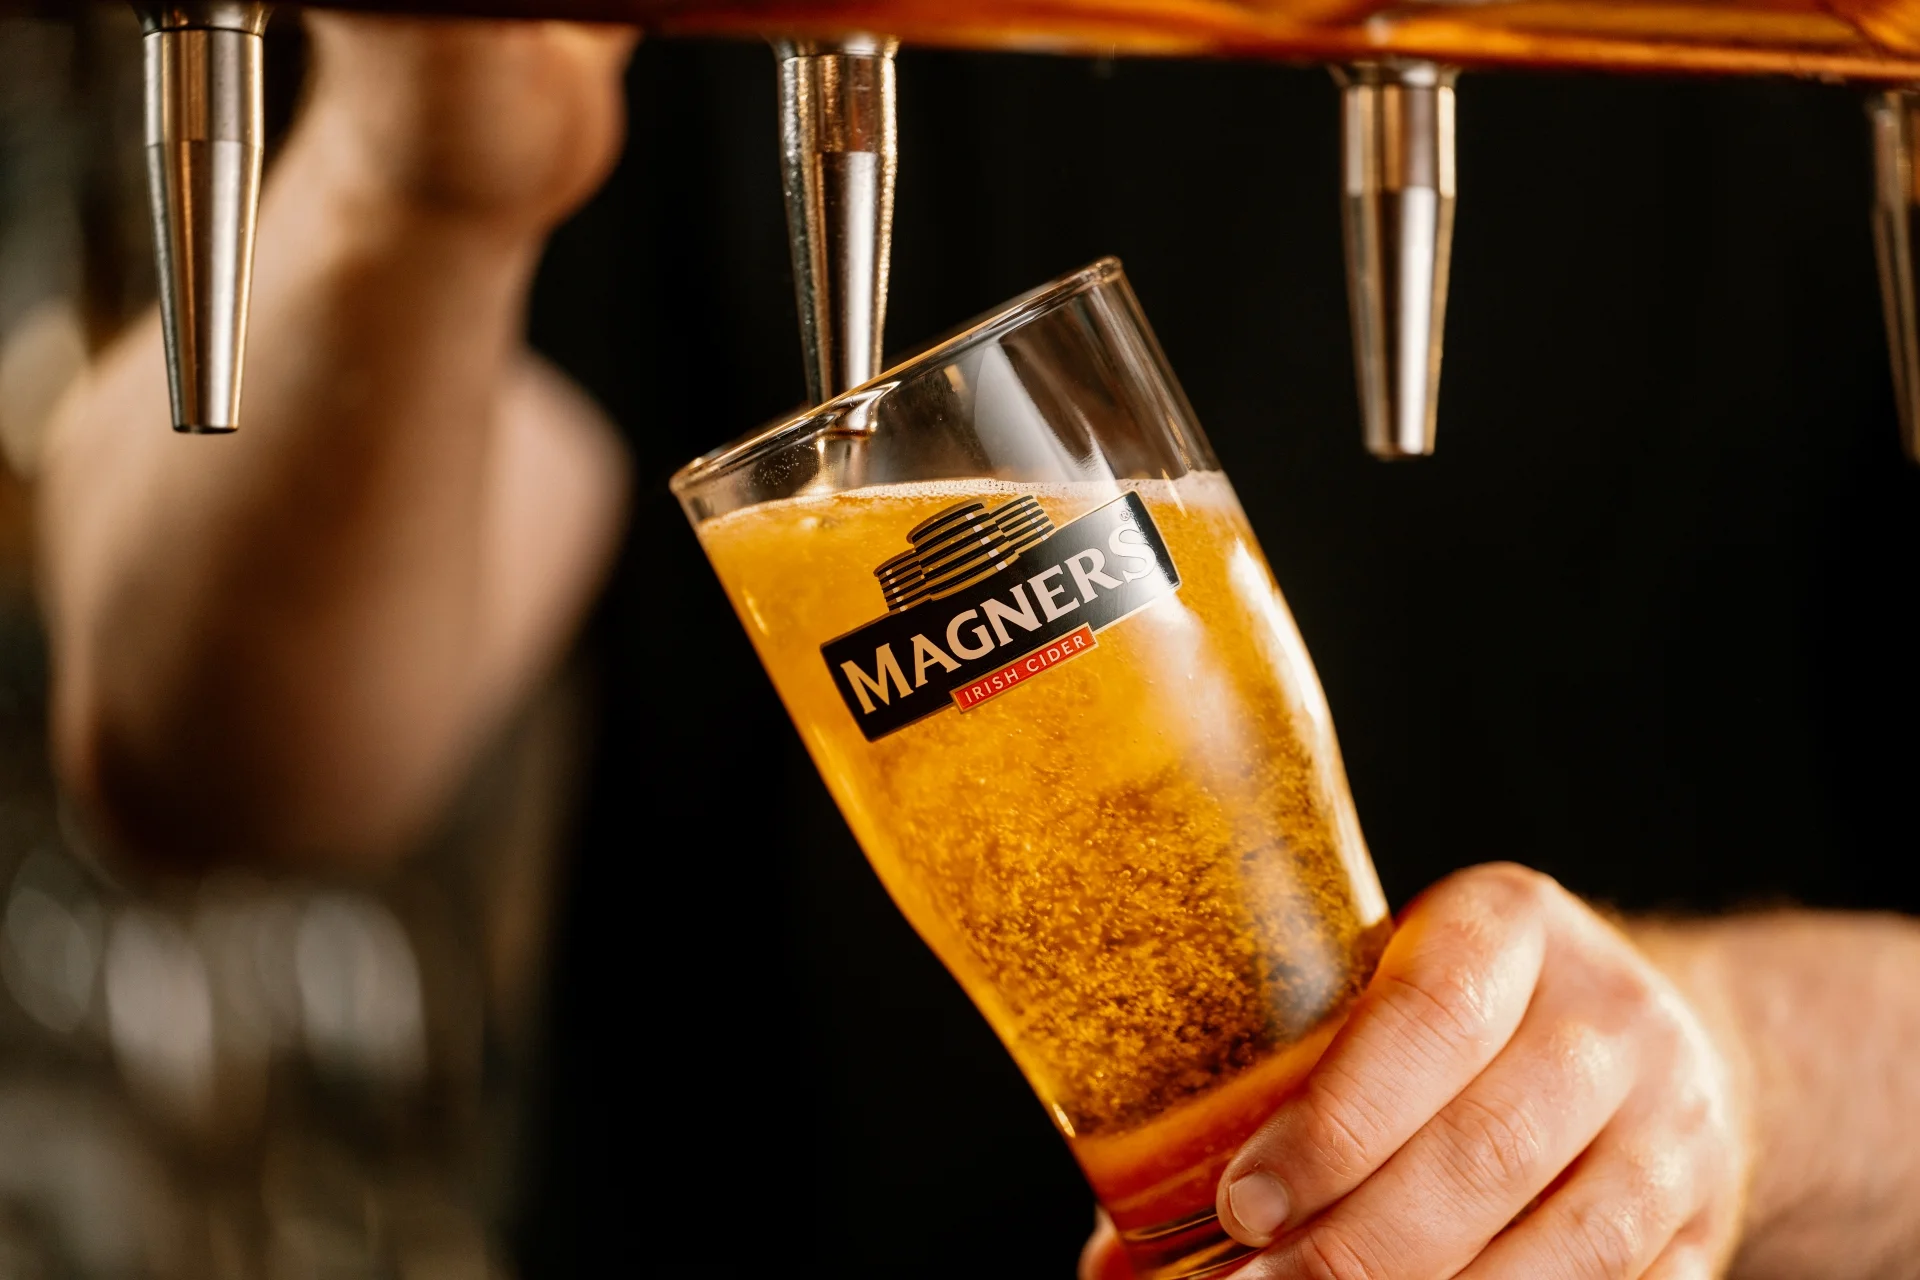 Looking to stock Magners?